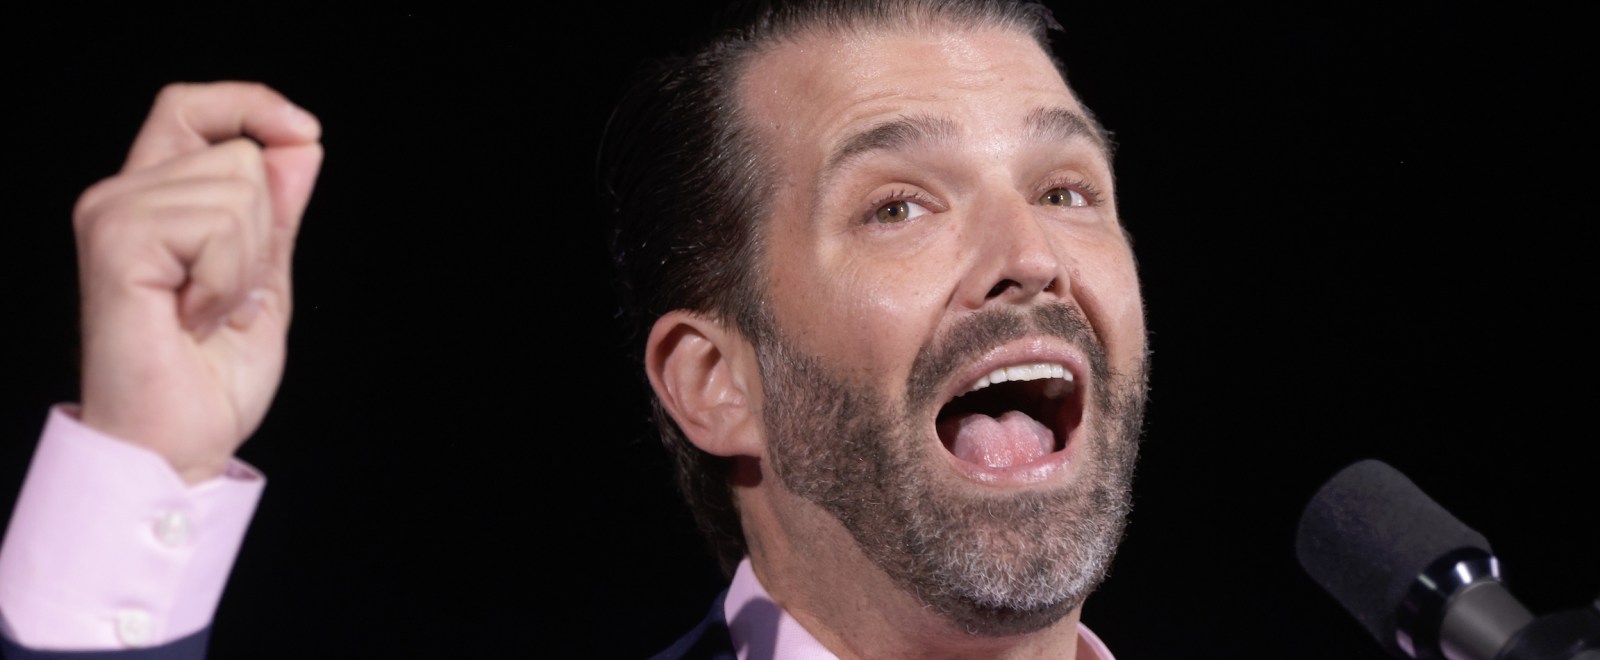 People Are A Little Worried About Don Jr. After Seeing An Especially Unhinged Video